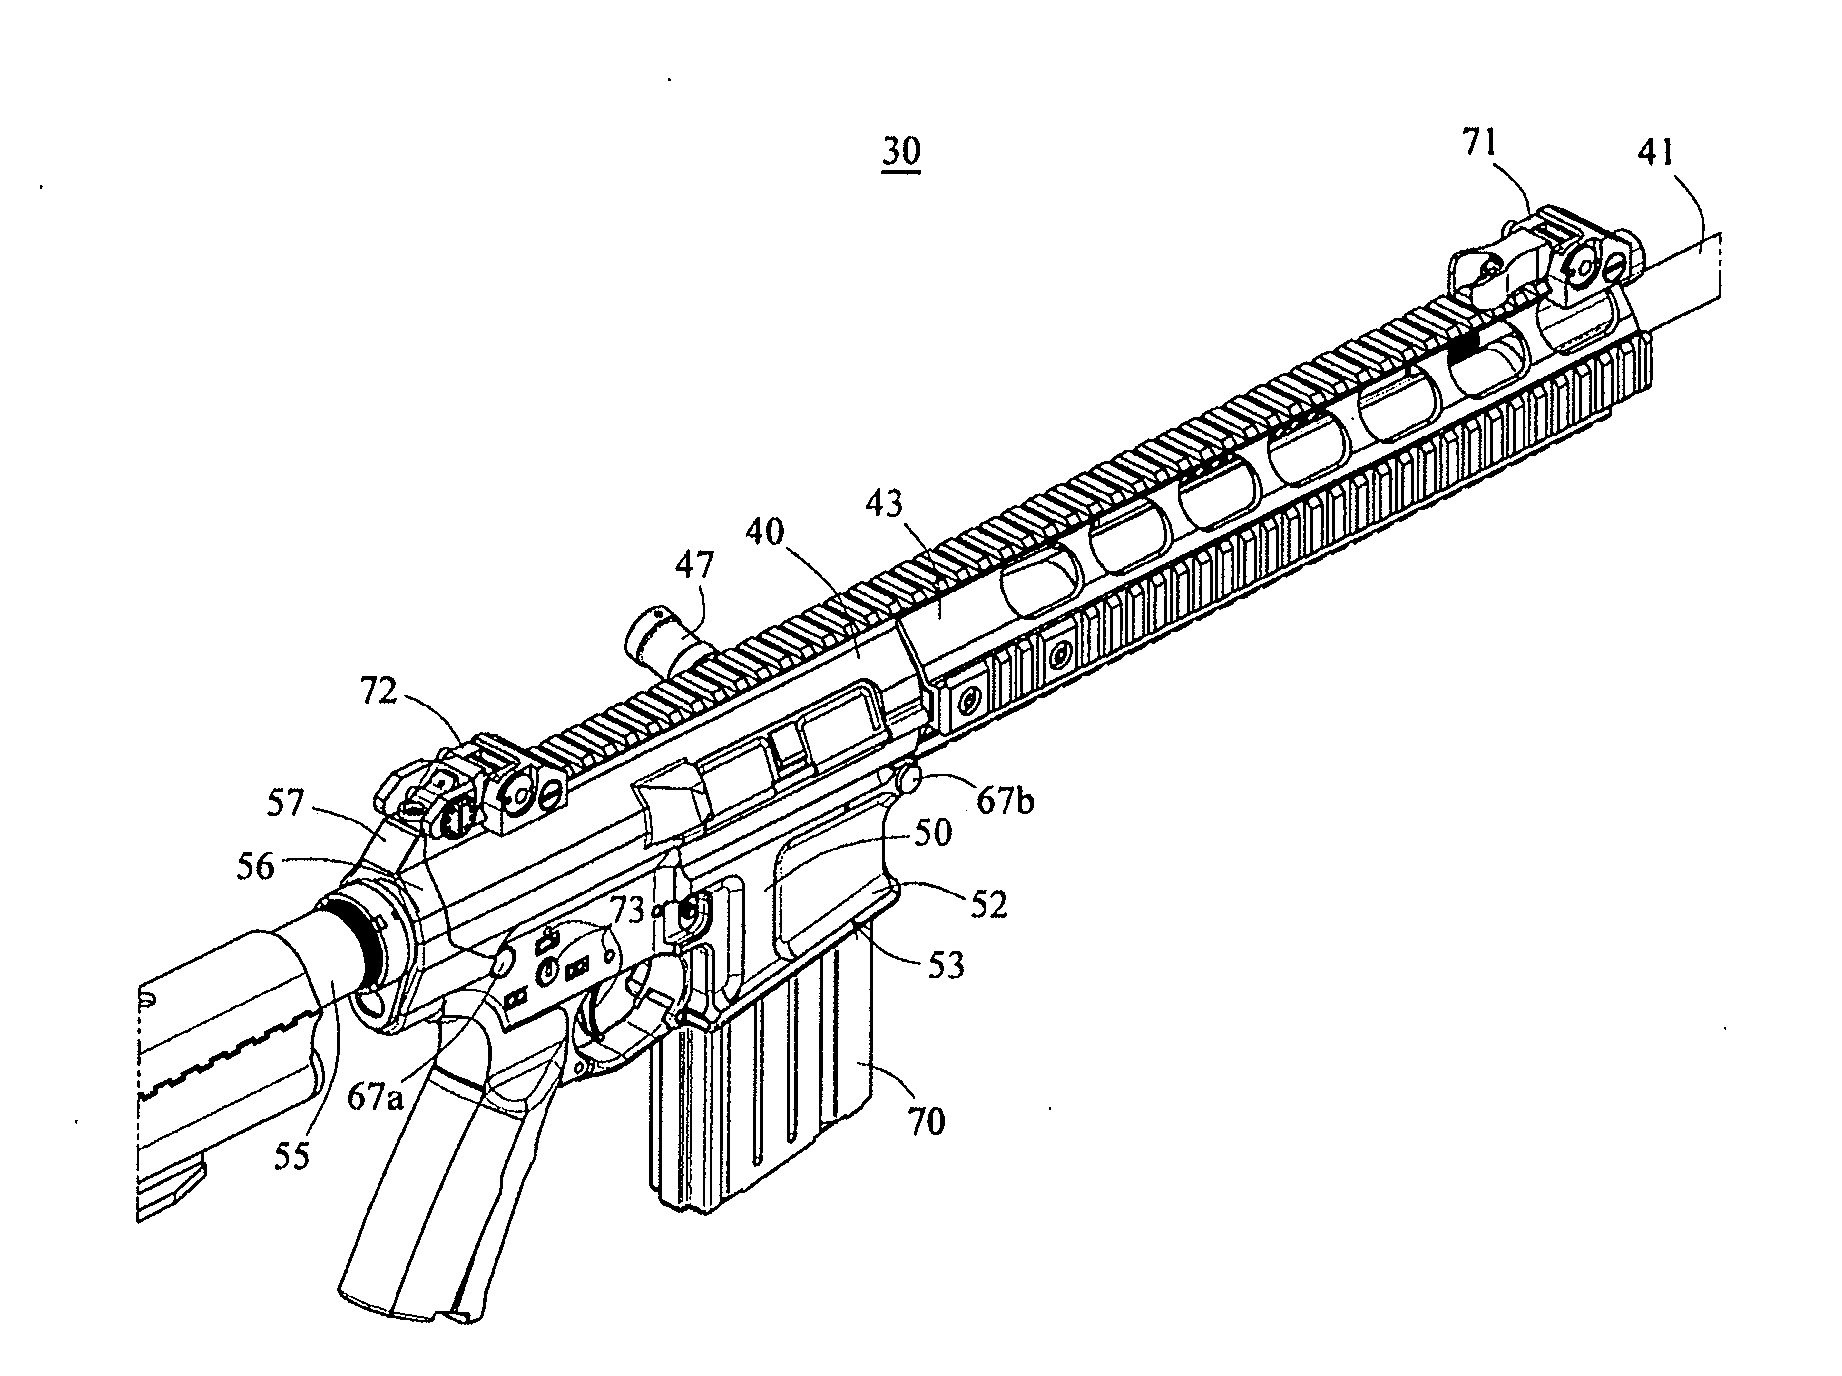 Receiver for an autoloading firearm